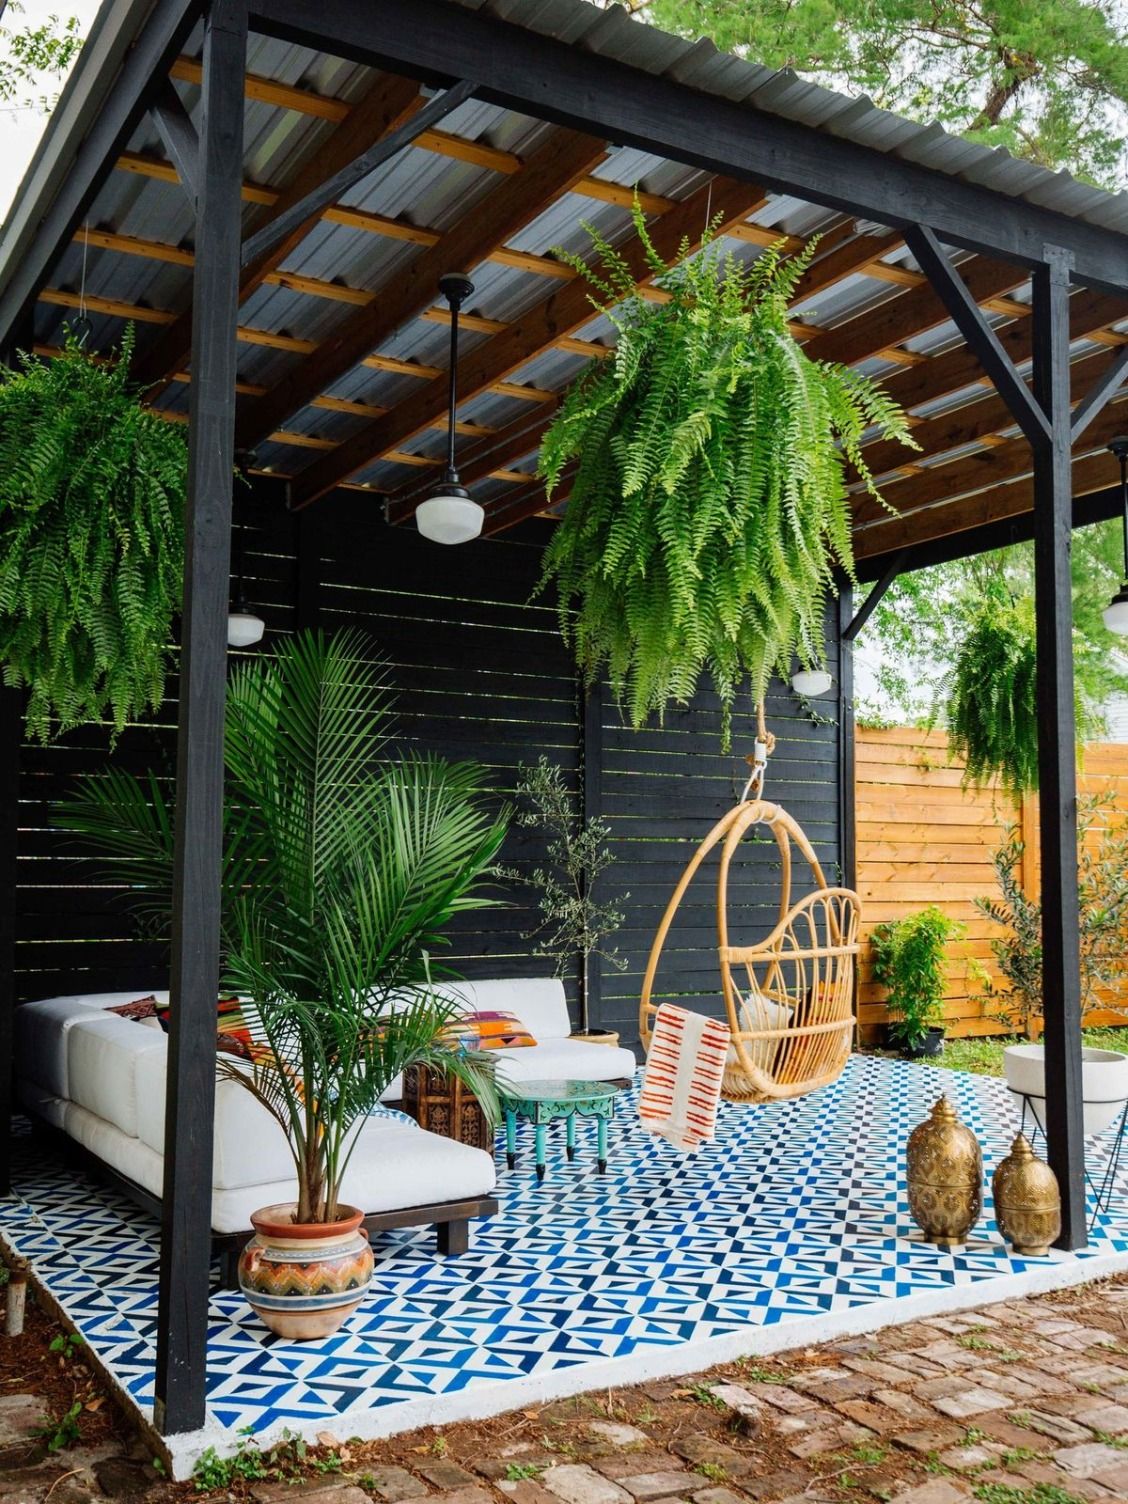 Charming And Cool Covered Pergola